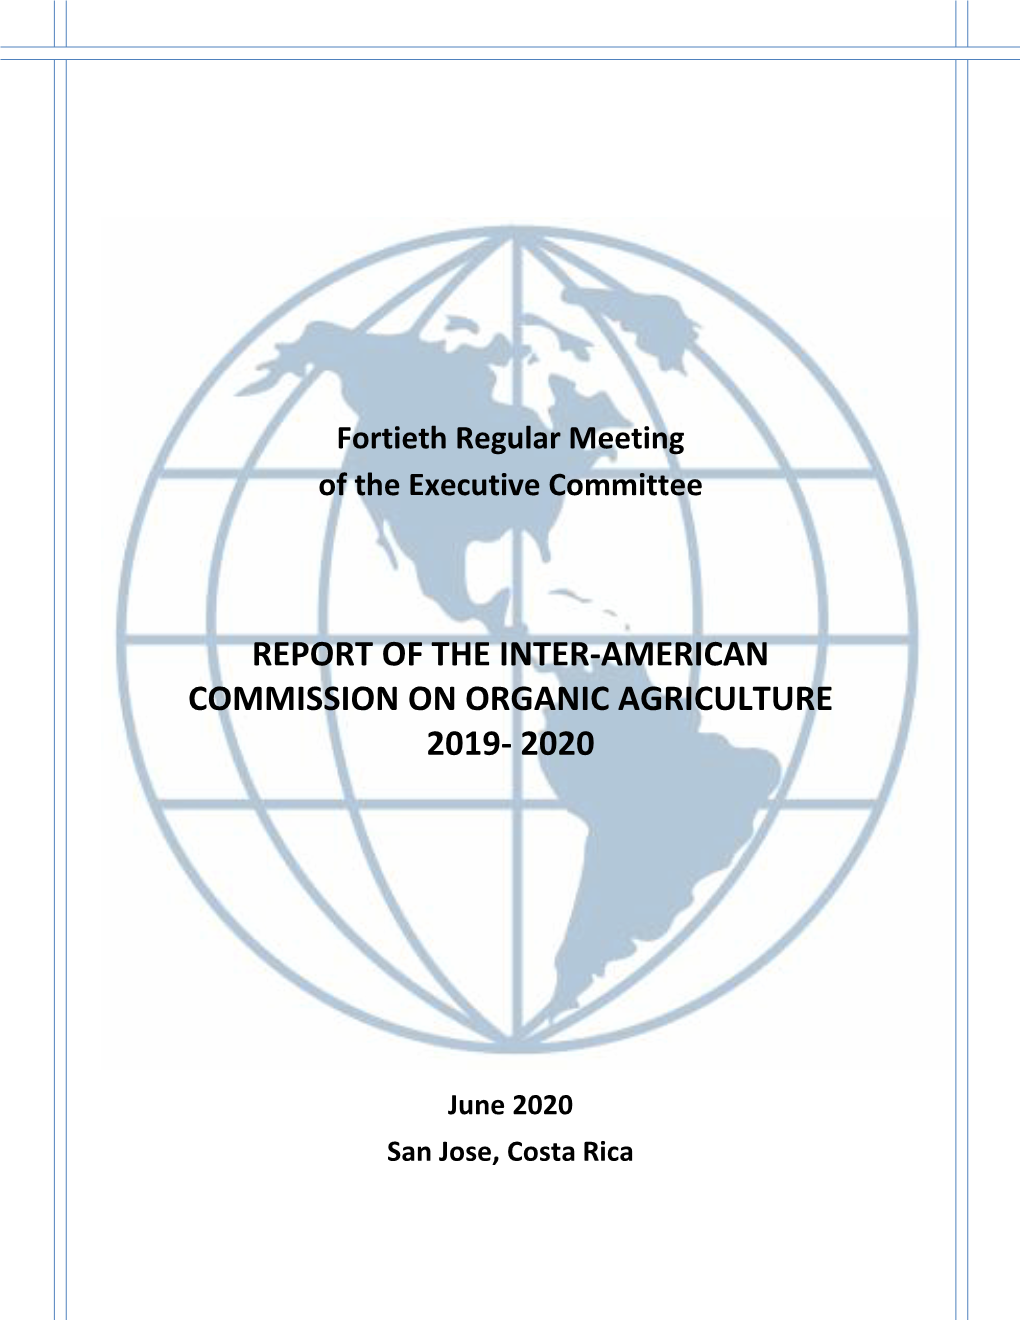 Report of the Inter-American Commission on Organic Agriculture 2019- 2020